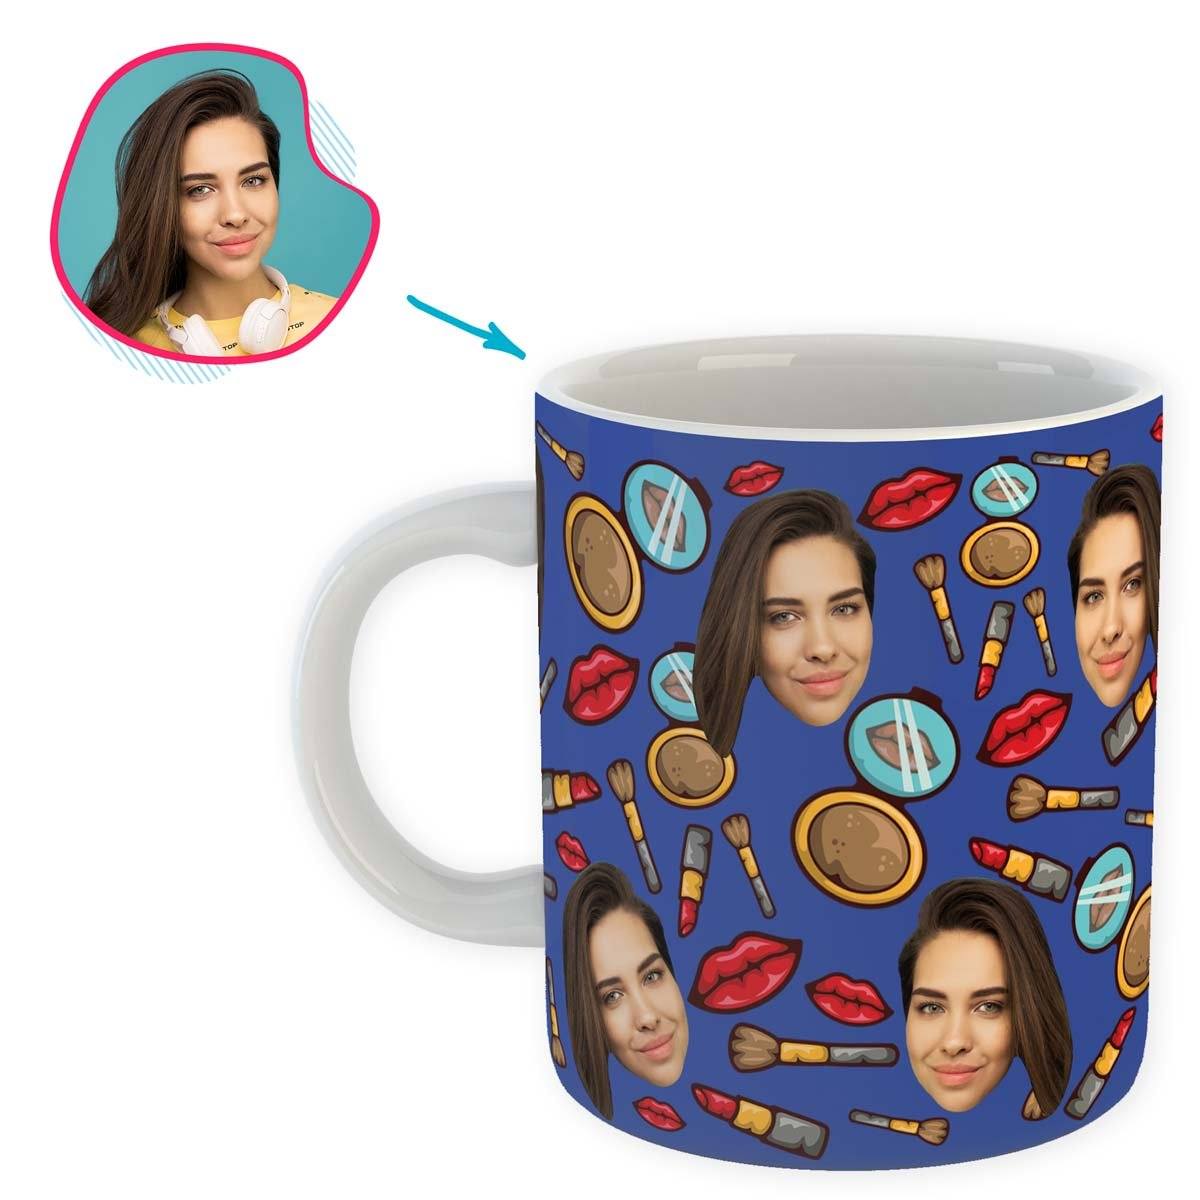 Darkblue Makeup personalized mug with photo of face printed on it